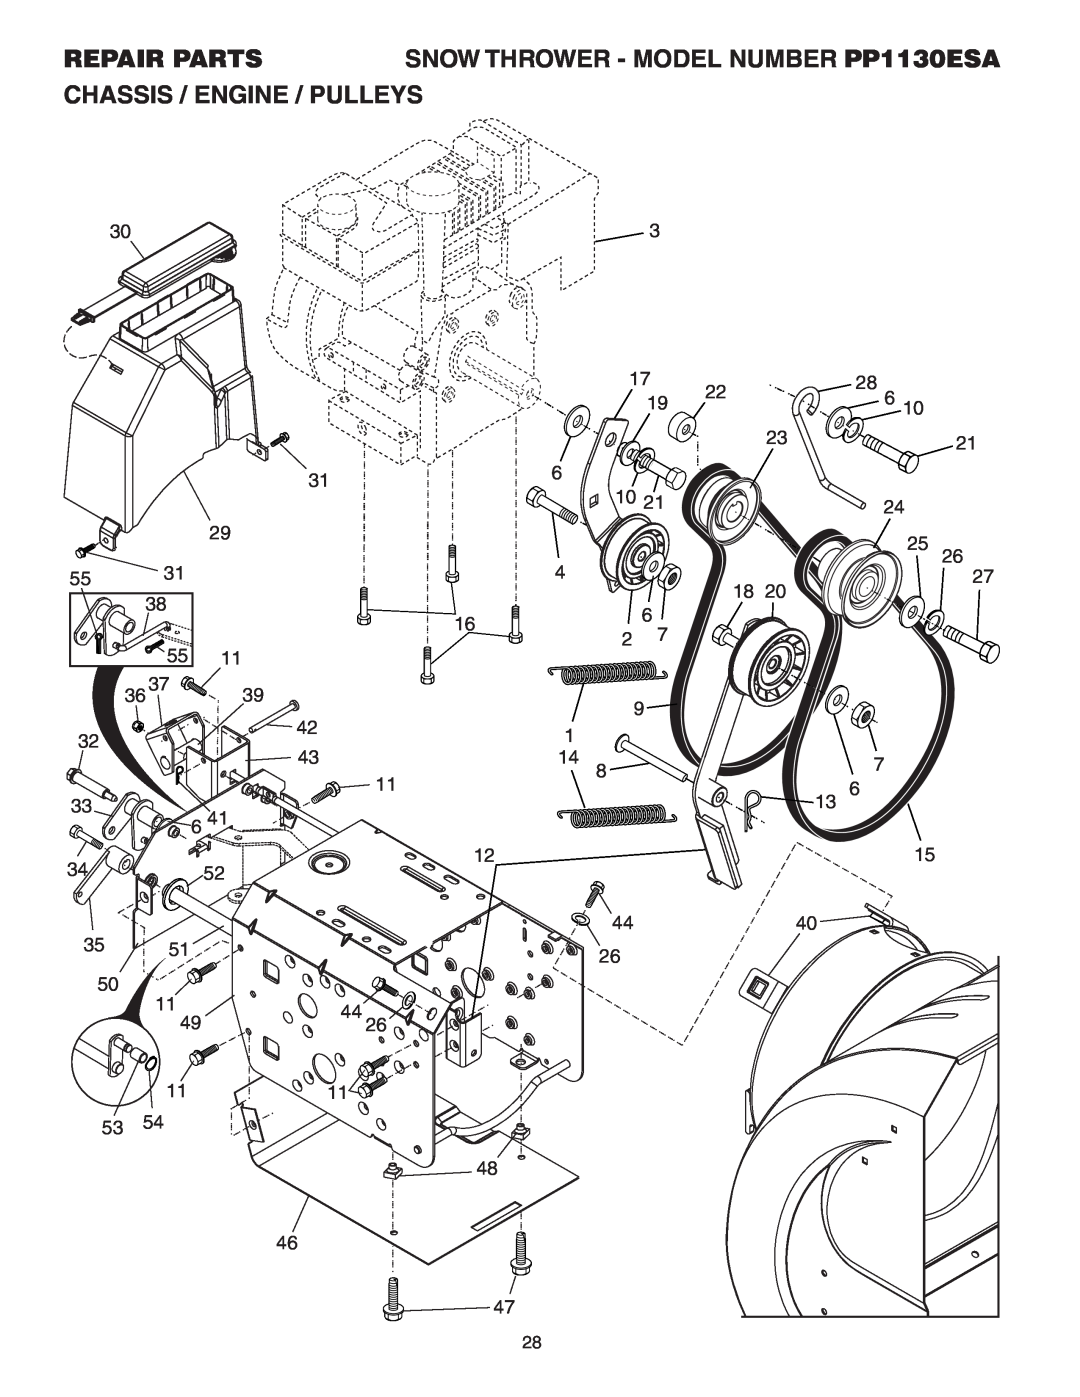 Poulan owner manual Chassis / Engine / Pulleys, Repair Parts, SNOW THROWER - MODEL NUMBER PP1130ESA, 3452 